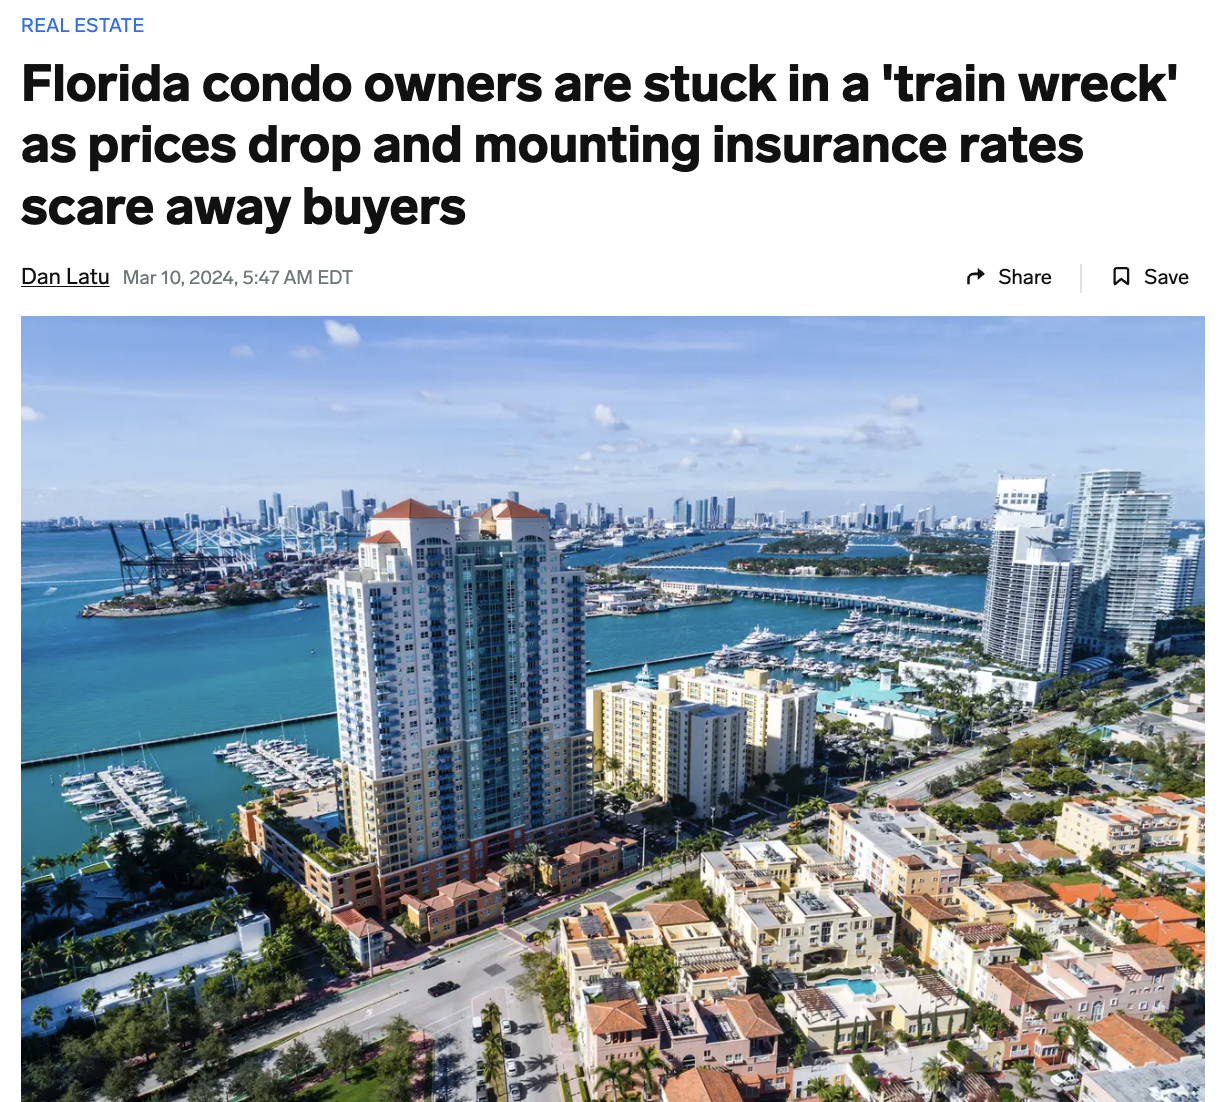 urban area - Real Estate Florida condo owners are stuck in a 'train wreck' as prices drop and mounting insurance rates scare away buyers Dan Latu , Edt Save